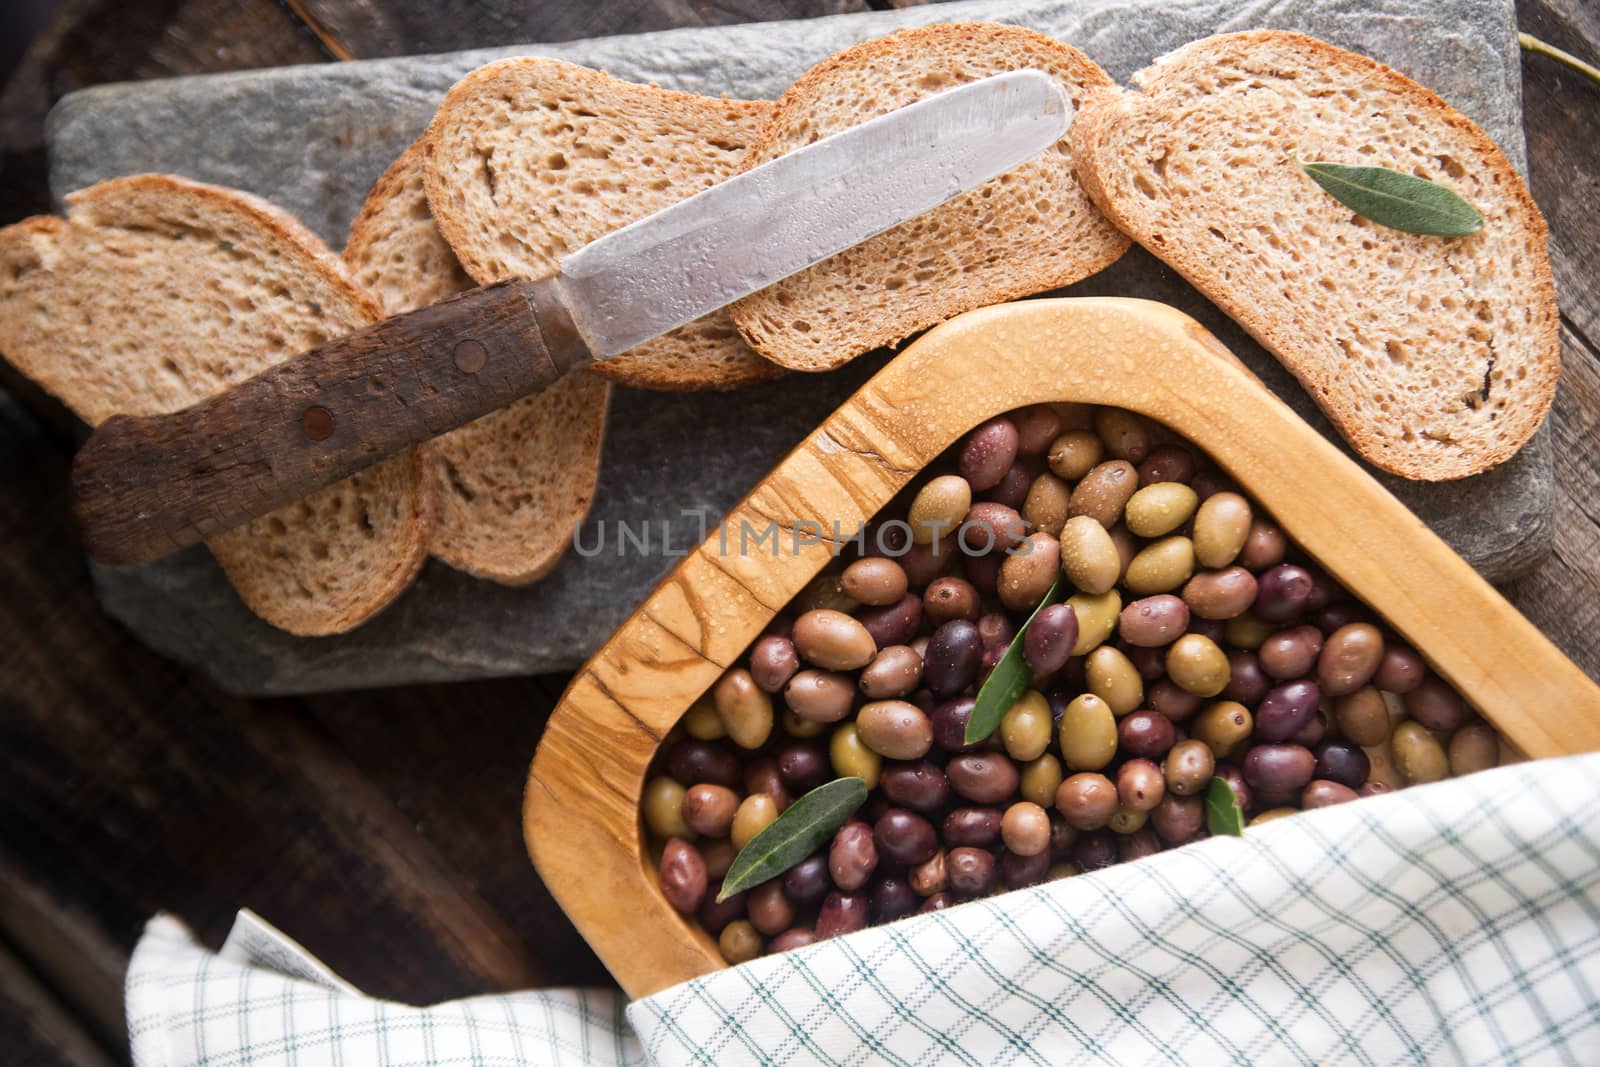 Bread and olives by fotografiche.eu